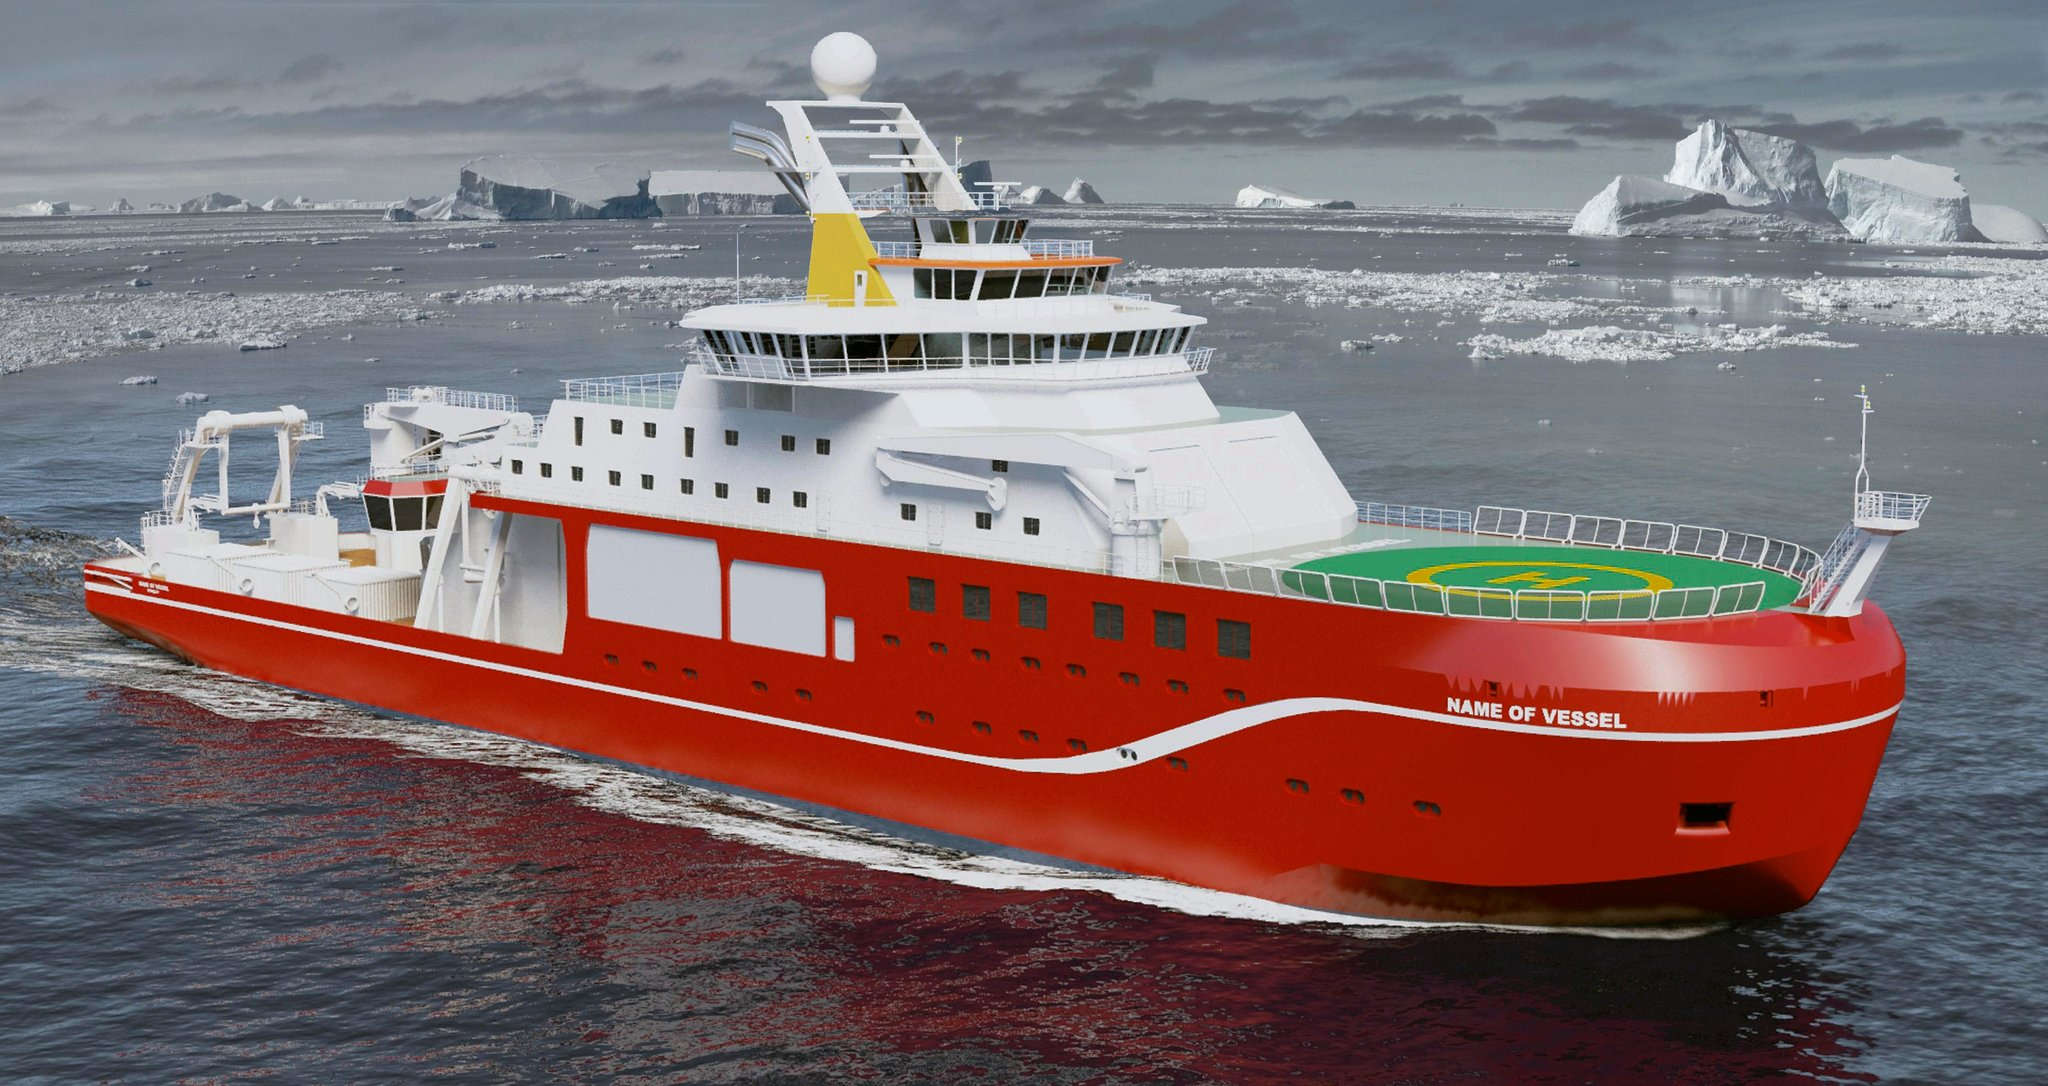 Stadium McStadiumFace, much like the people's choice vote for  U.S.S Boaty McBoatFace, which set sail in the United Kingdom in 2017 after the National Environmental Research Council (NERC) agency in the United Kingdom let the public vote on the boat's name.  Thanks, Internet! 